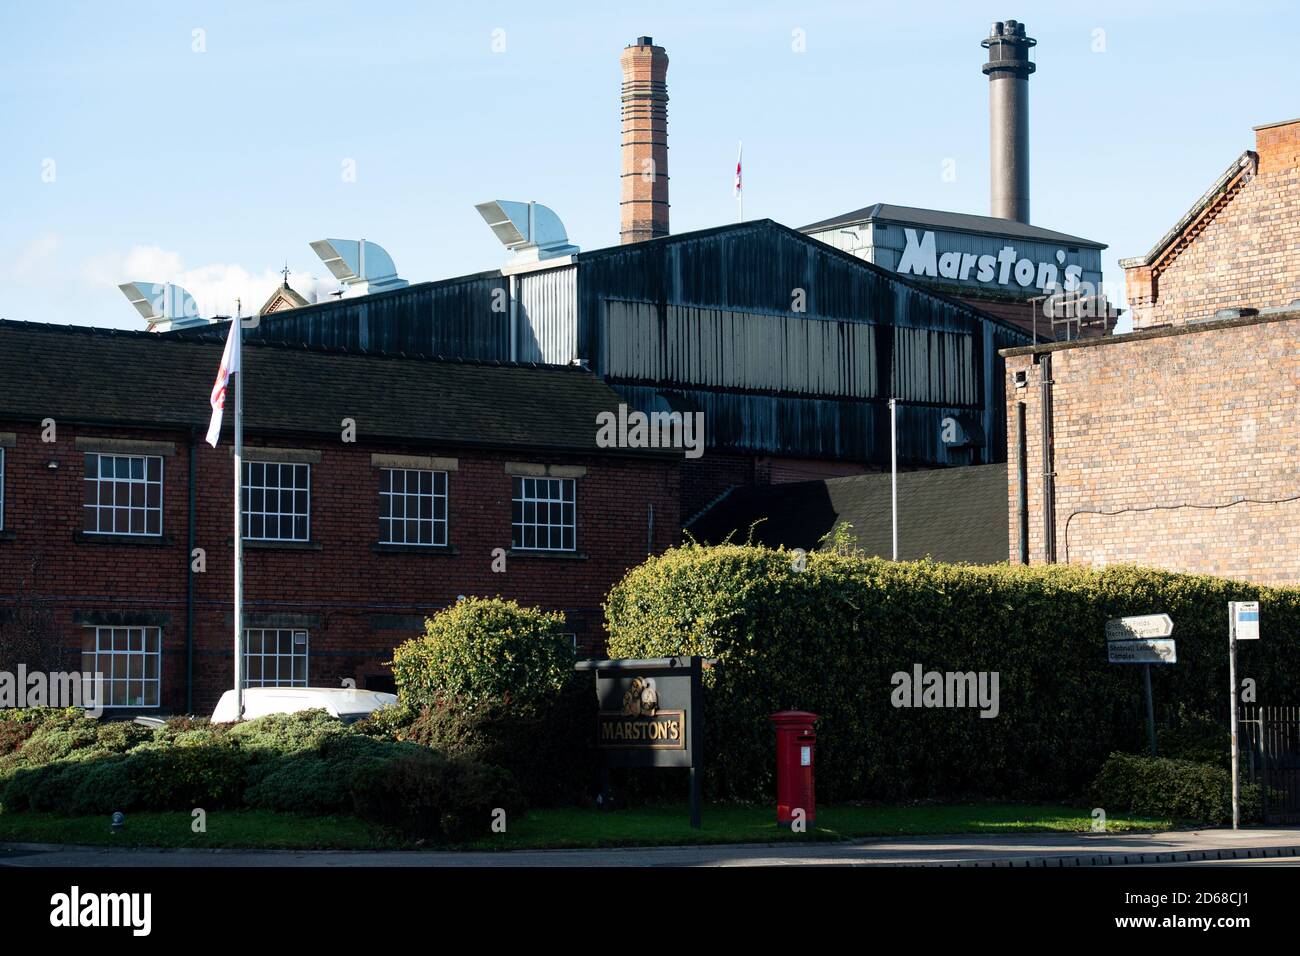 Marston's Brewery in Burton upon Trent, Staffordshire. More than 2,000 jobs are being axed at the pub chain as curfews and new coronavirus restrictions have hammered trade. Stock Photo